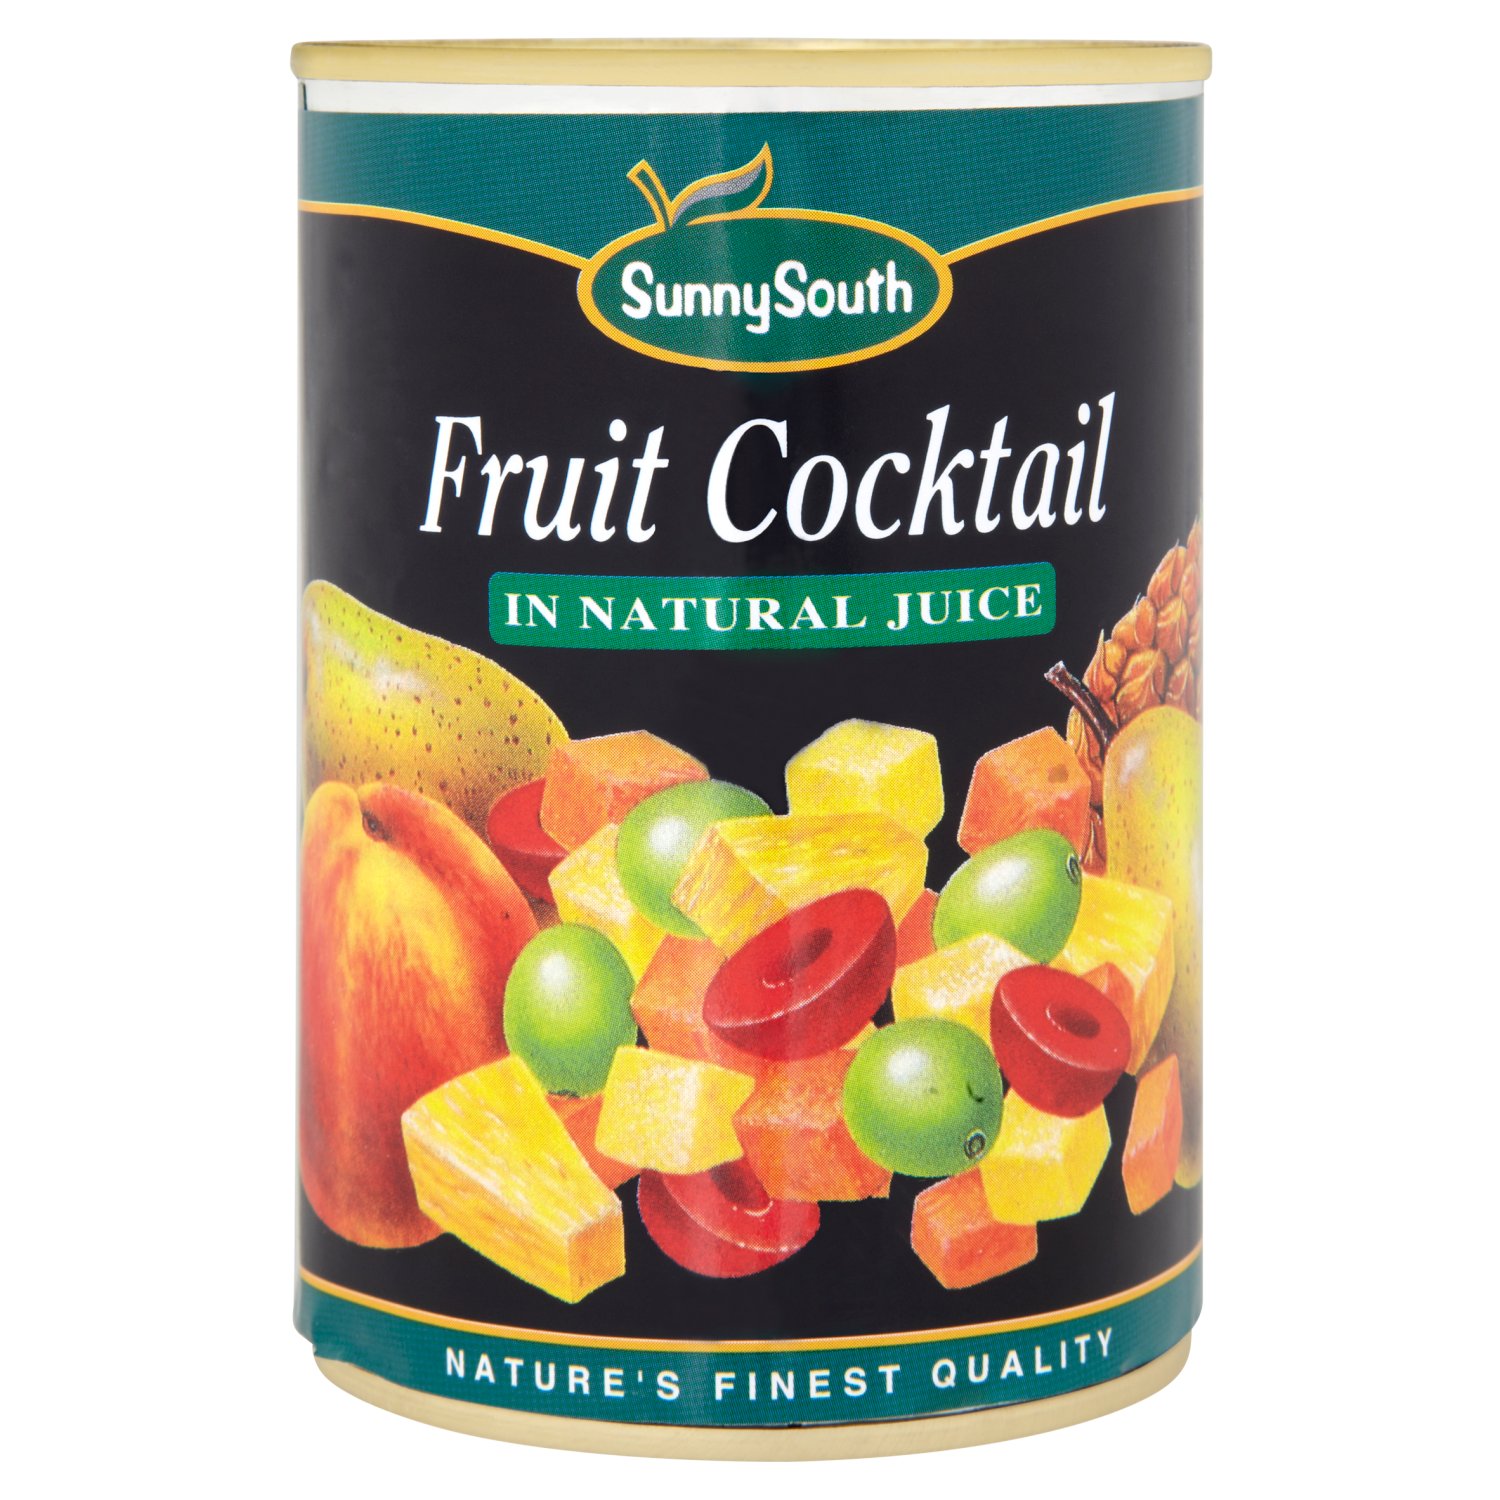 Sunny South Fruit Cocktail in Juice (411 g)